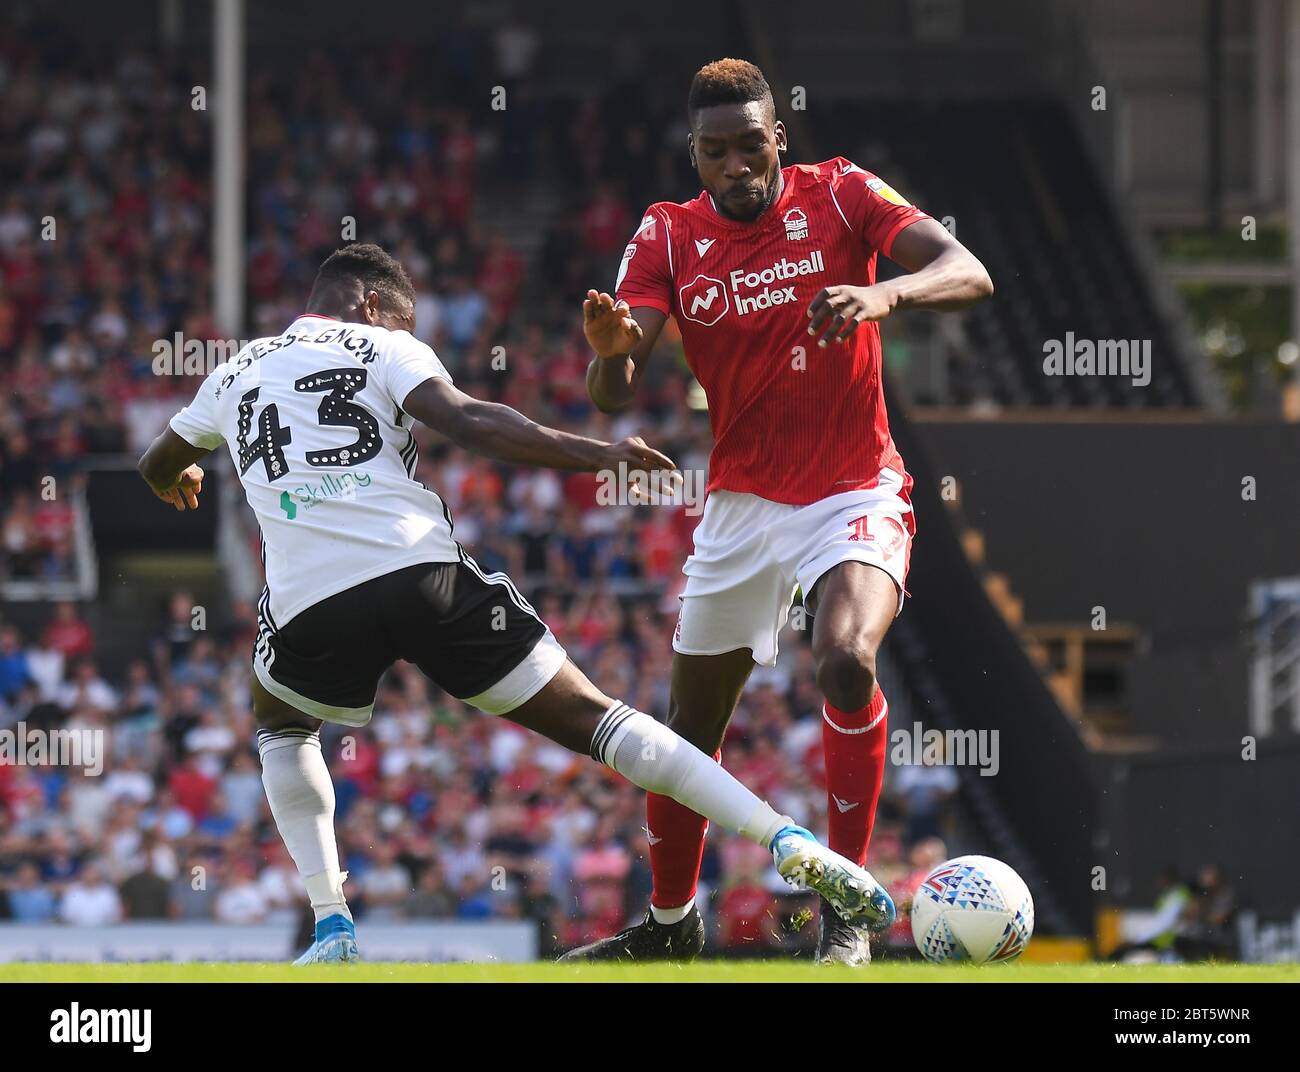 LONDRA, INGHILTERRA - 24 AGOSTO 2019: Sammy Ameobi of Forest pictured durante il campionato EFL SkyBet 2019/20 tra Fulham FC e Nottingham Forest FC a Craven Cottage. Foto Stock